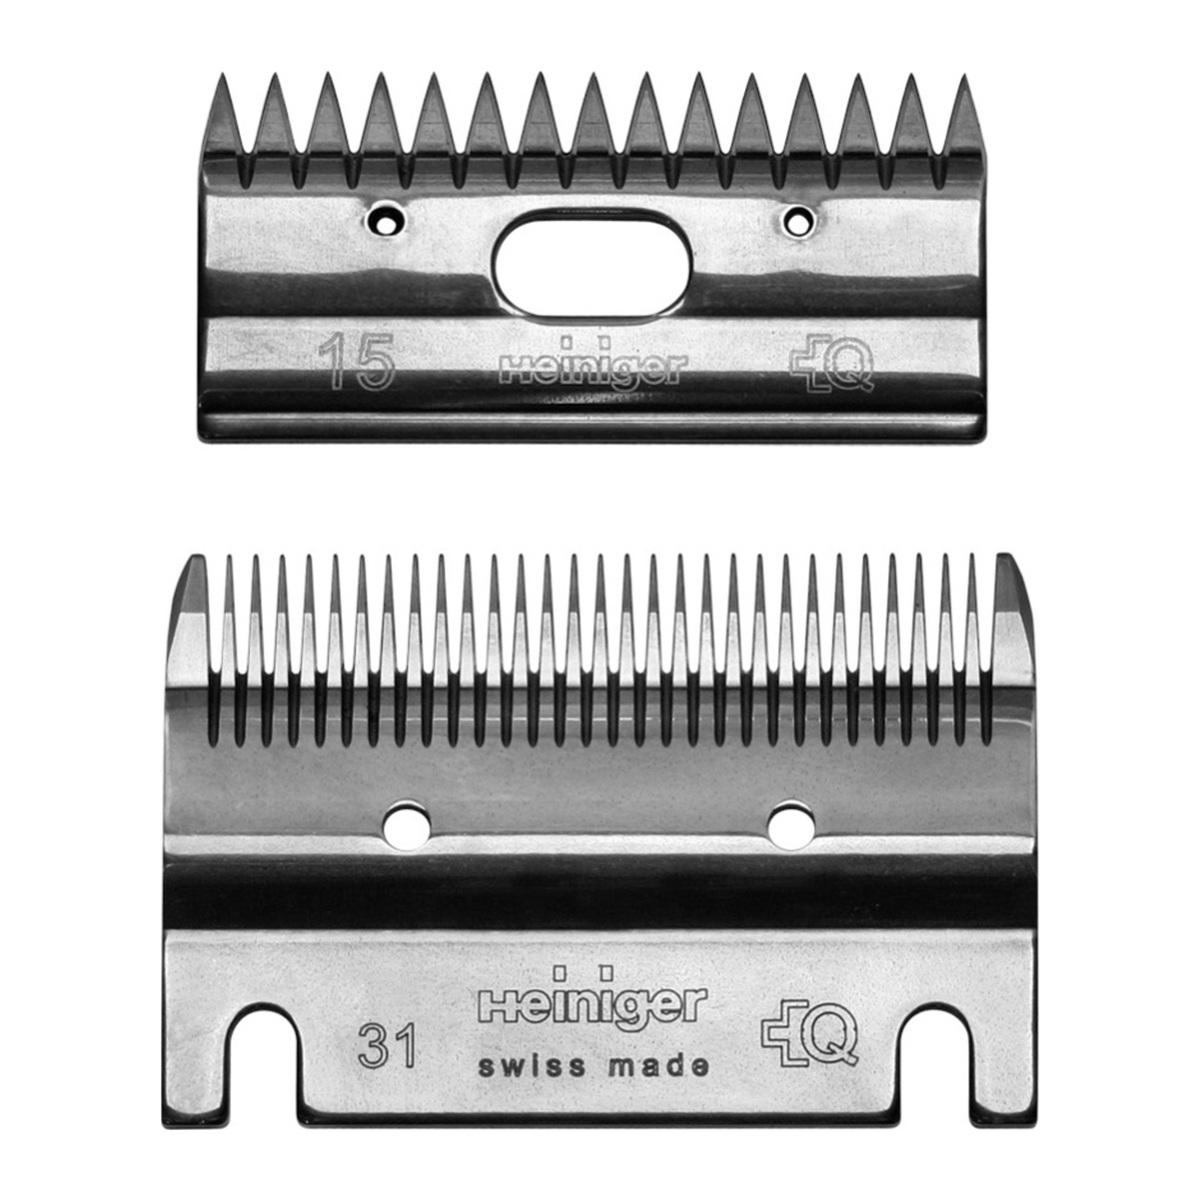 HEINIGER REPLACEMENT CLIPPER BLADE 31/15 STANDARD FREE DELIVERY 